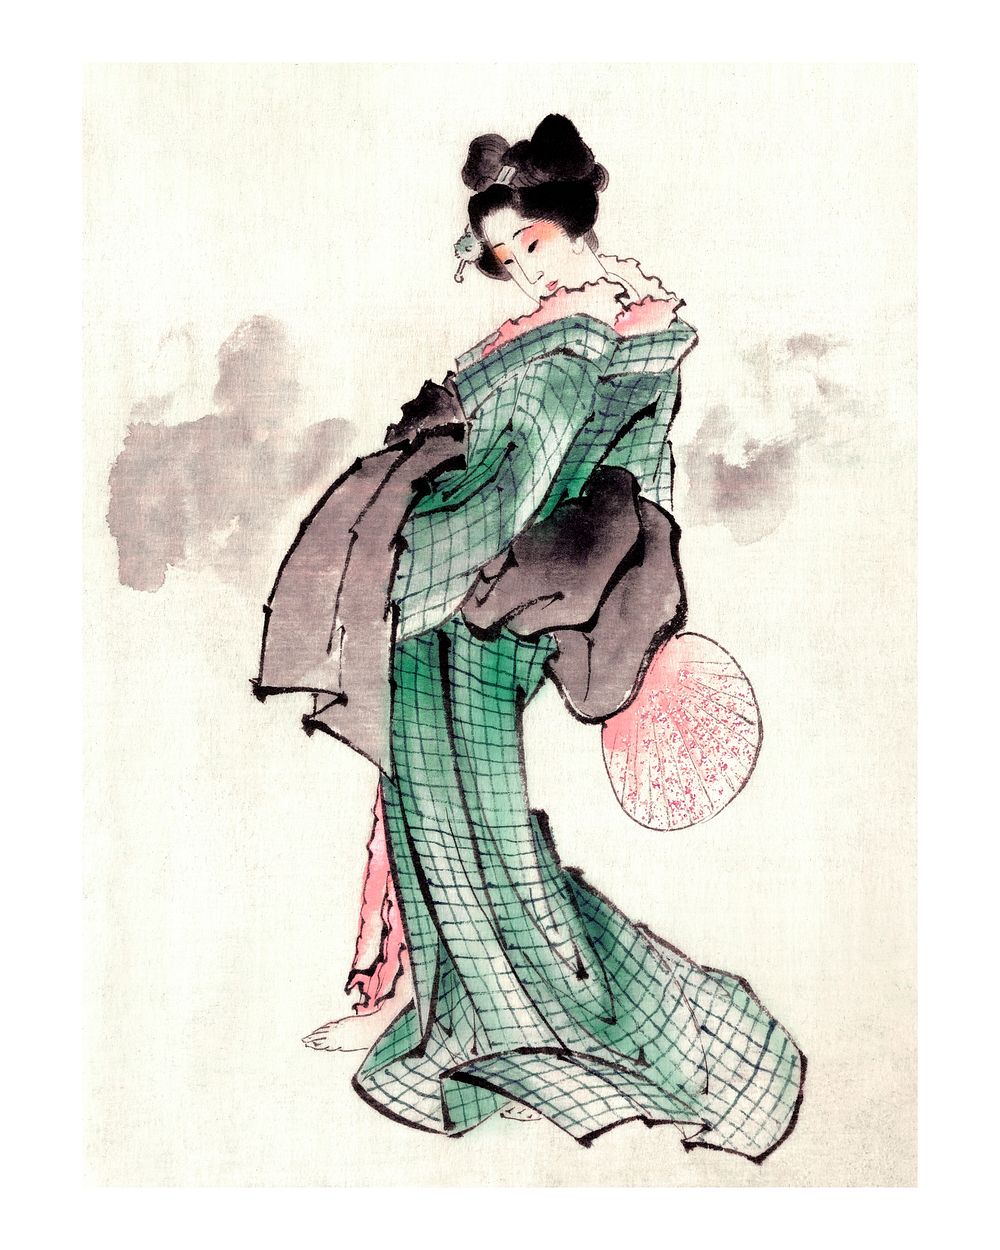 Japanese woman in kimono and a shamisen on the floor ukyio-e style vintage illustration wall art print and poster design…